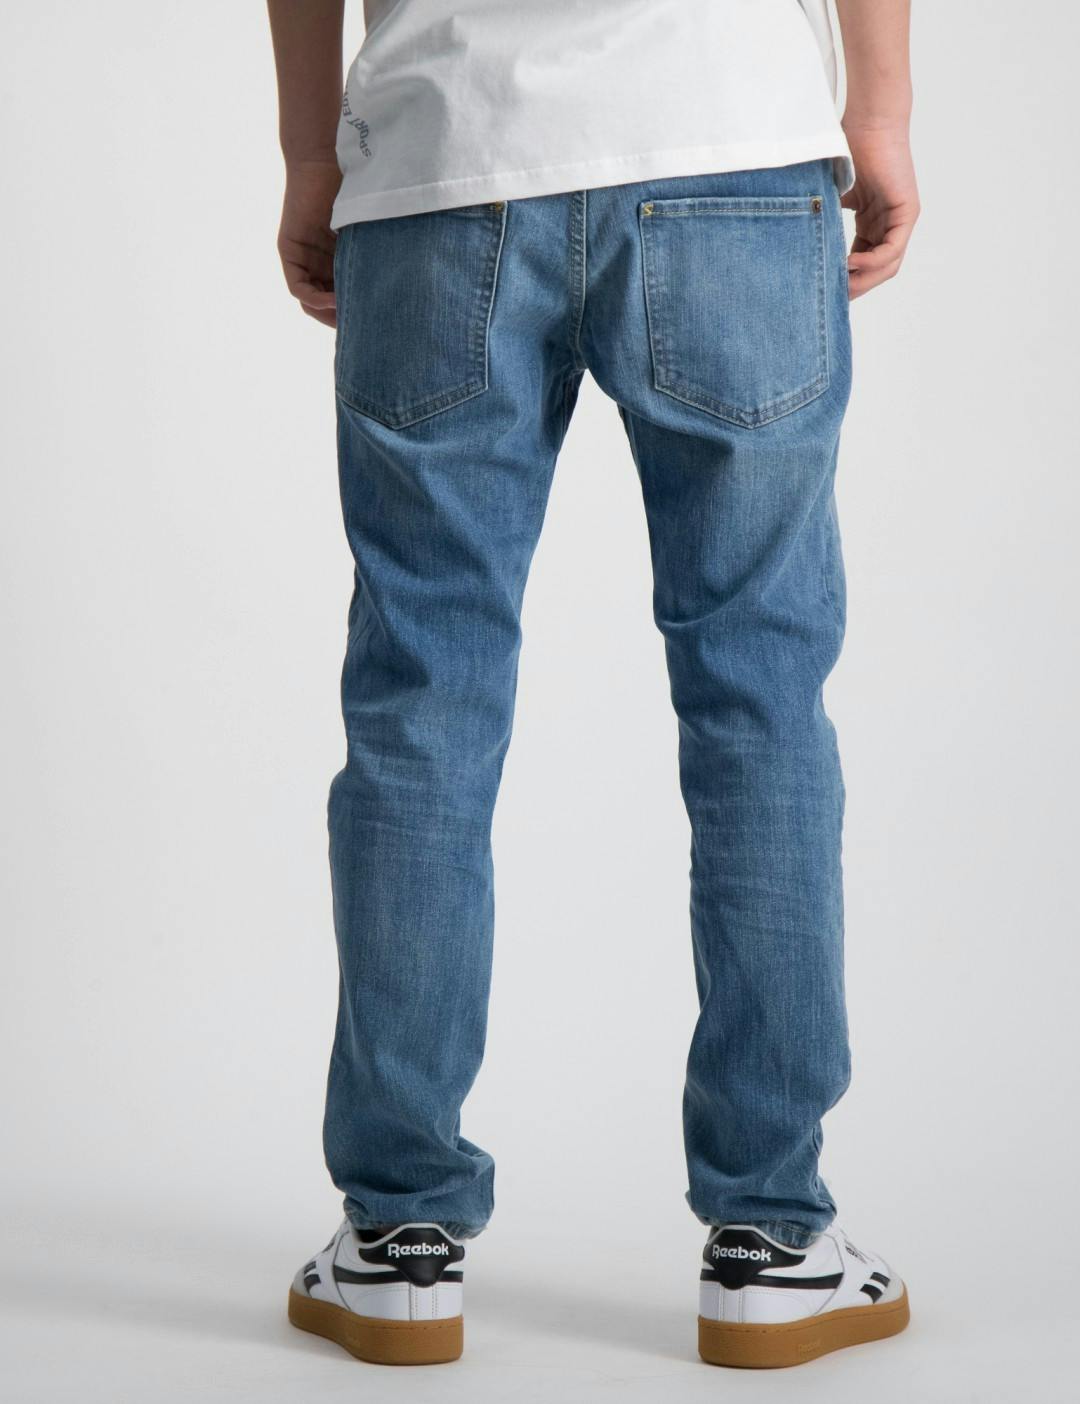 D2P118LM SKATER JEAN TROUSERS